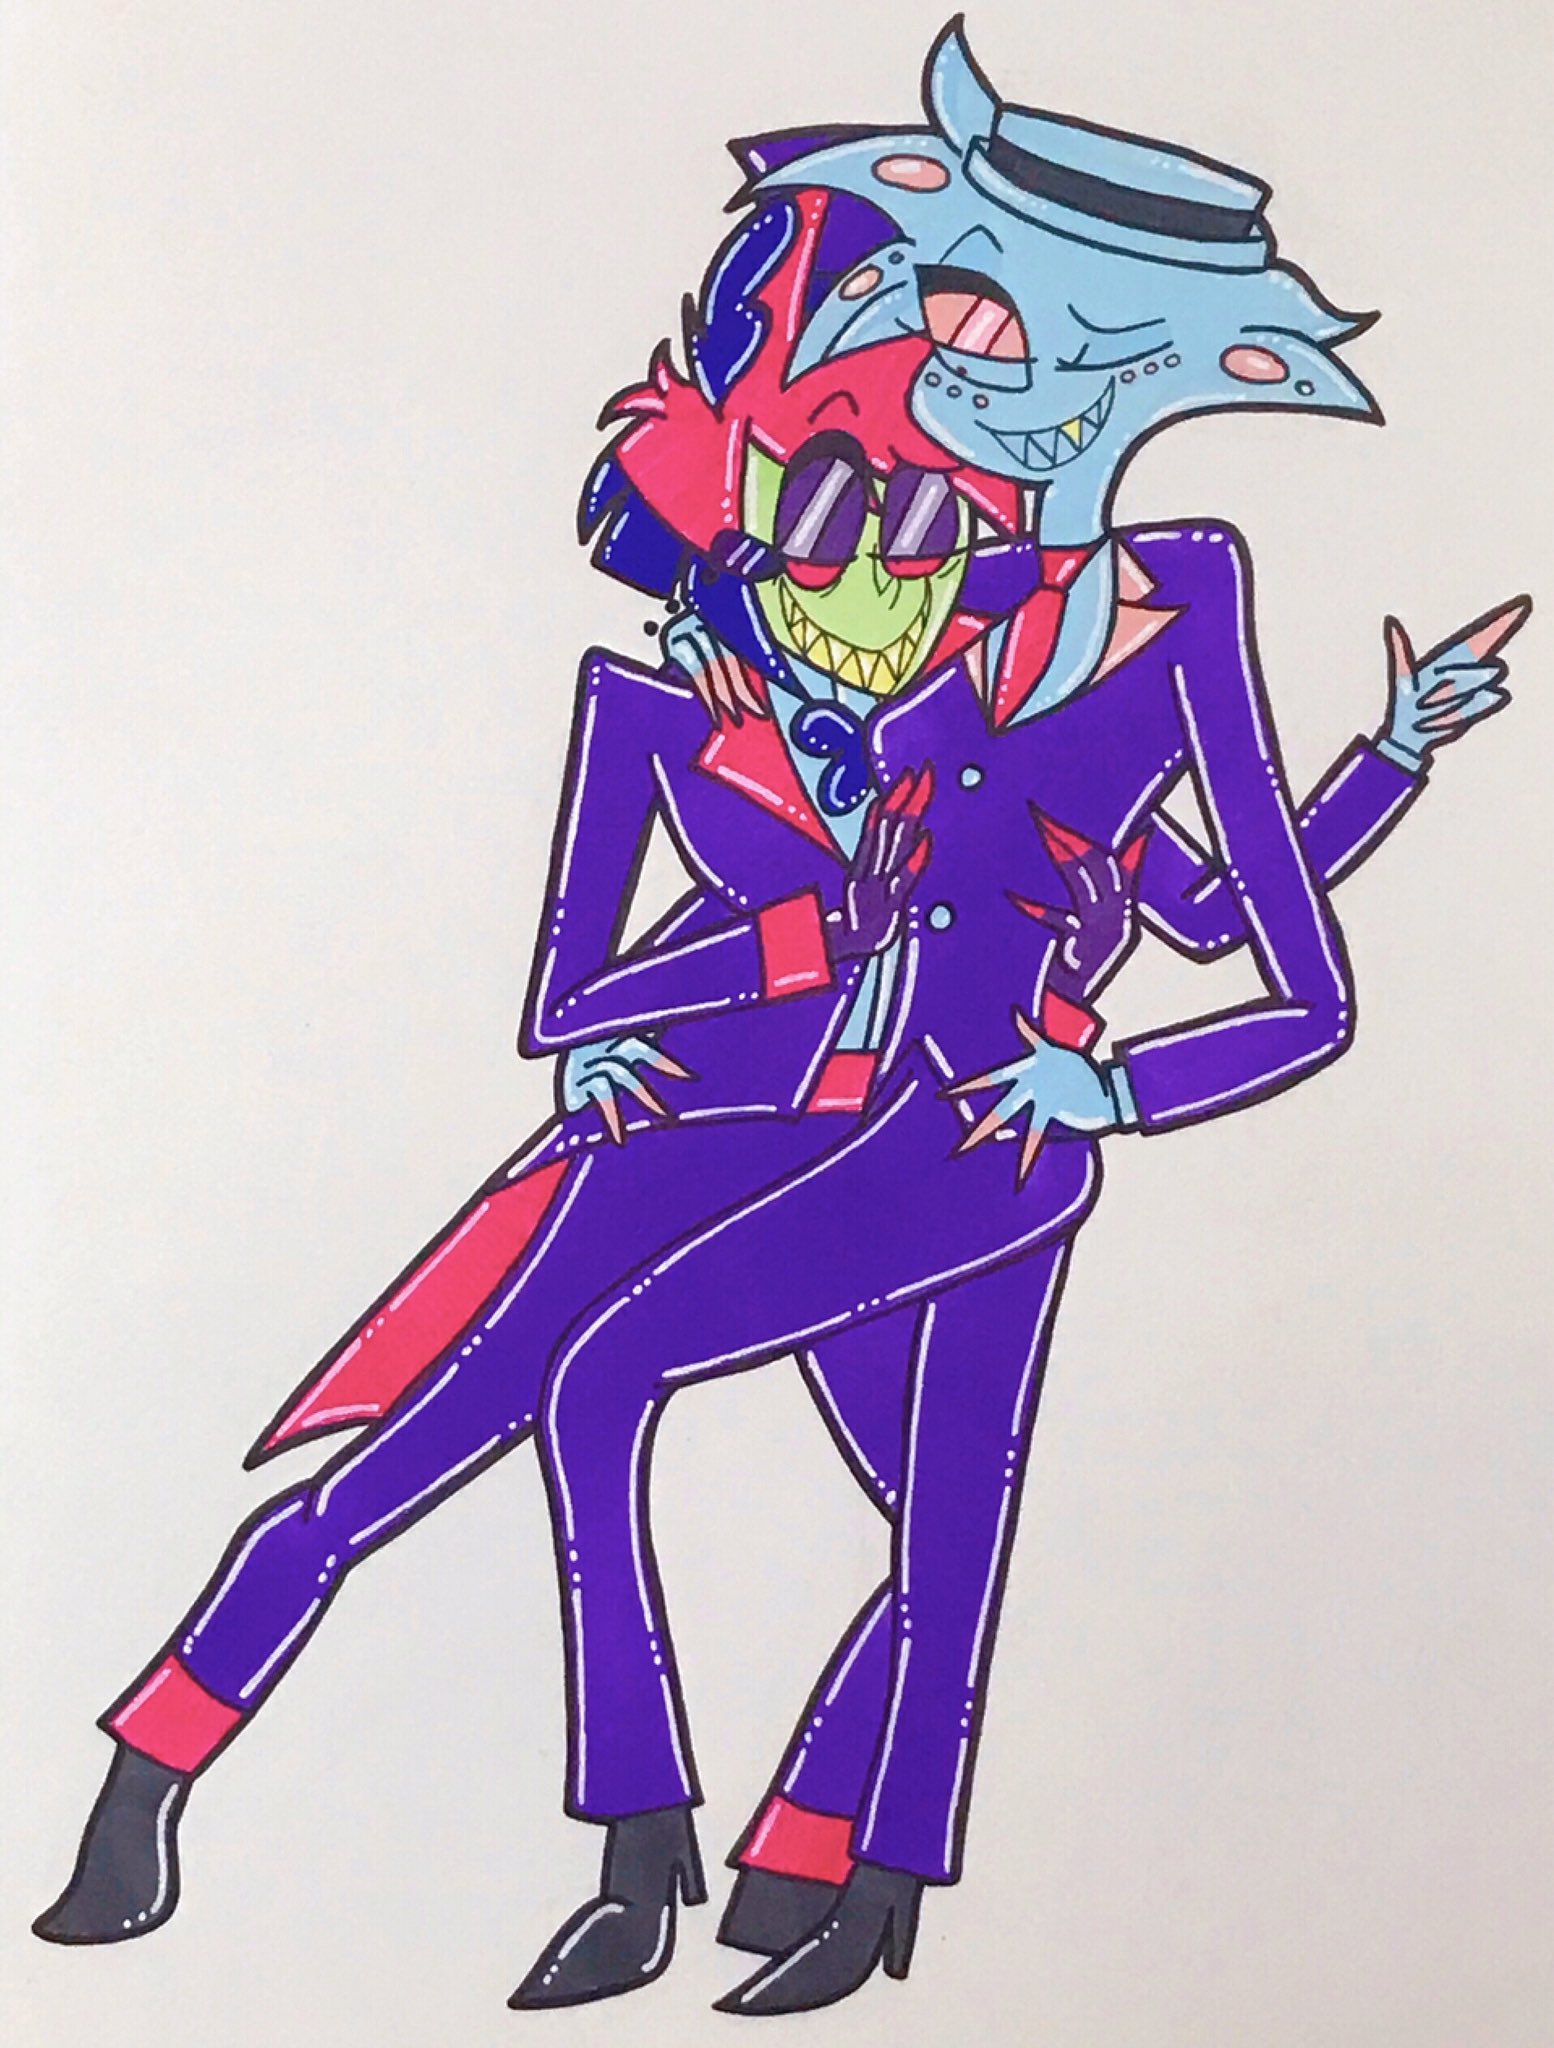 Dreamy Thanos On Twitter I Tried To Color Them Like The Black Light Effect During Alastor S Song And Idk If It Worked But Whatever More Radiodust ツ Hazbinhotel Hazbinhotelfanart Radiodust Https T Co Lcc0vgkdwv - rbxos on twitter yall mind if i thanos car roblox